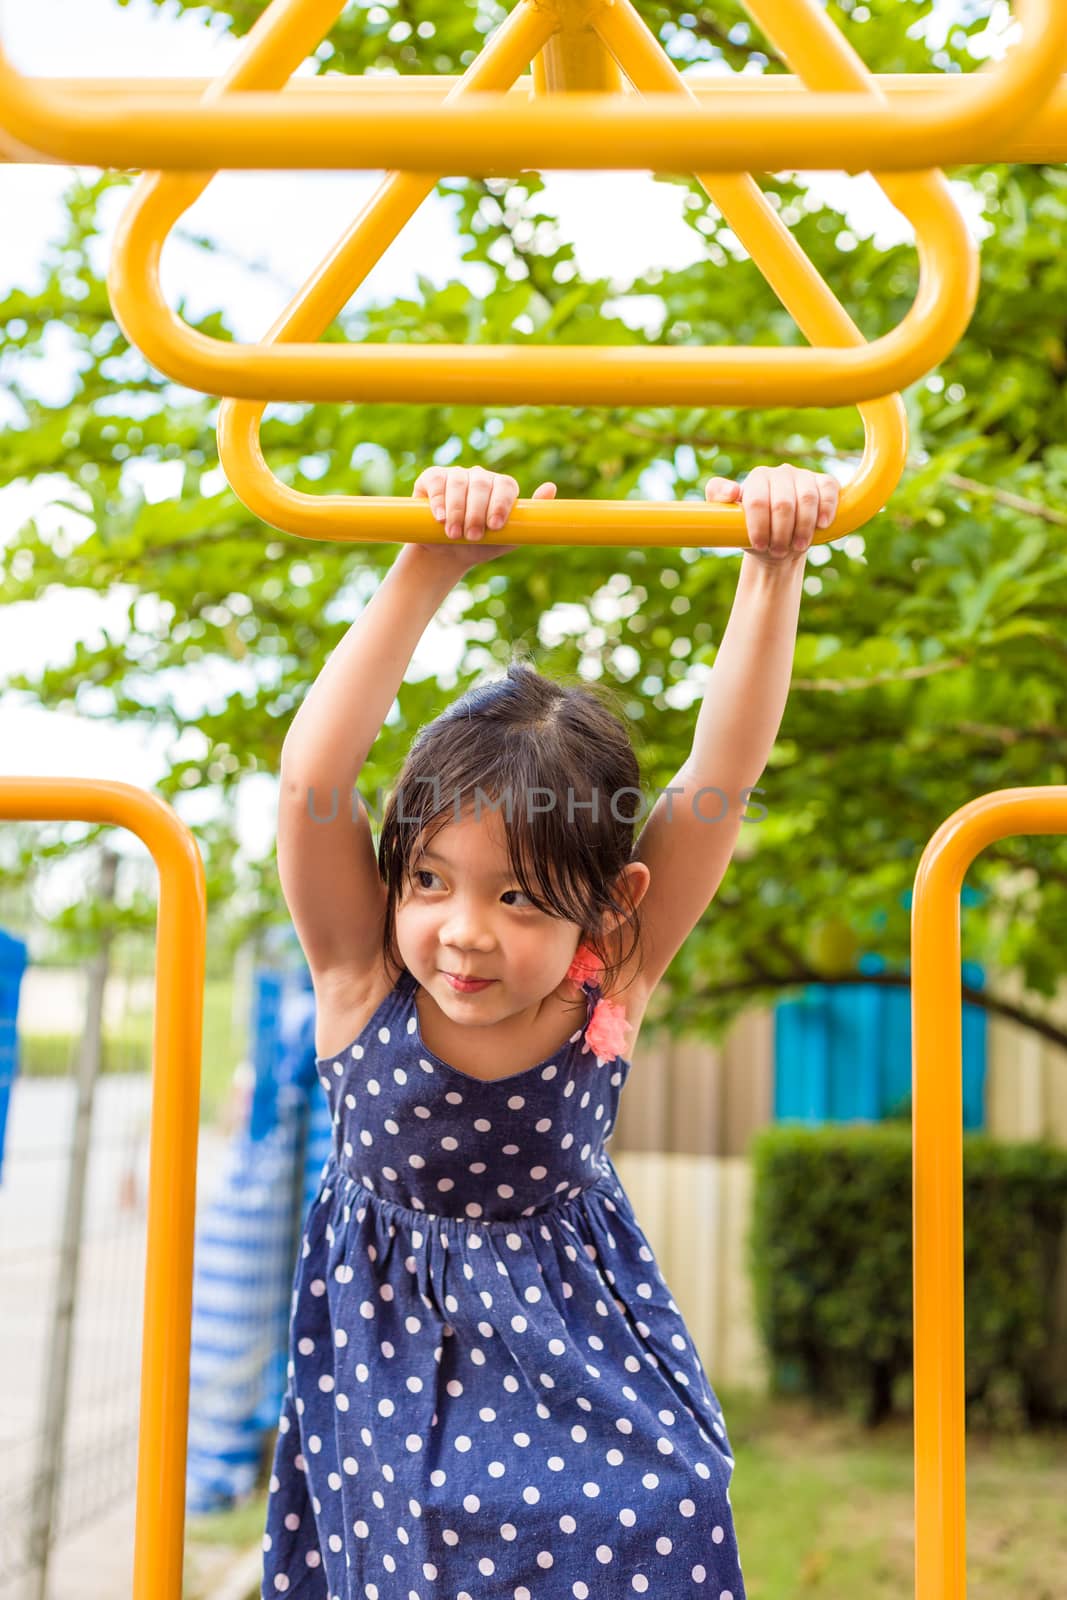 Young Girl Playing on Playground / Happy Young Girl Playing on P by supparsorn